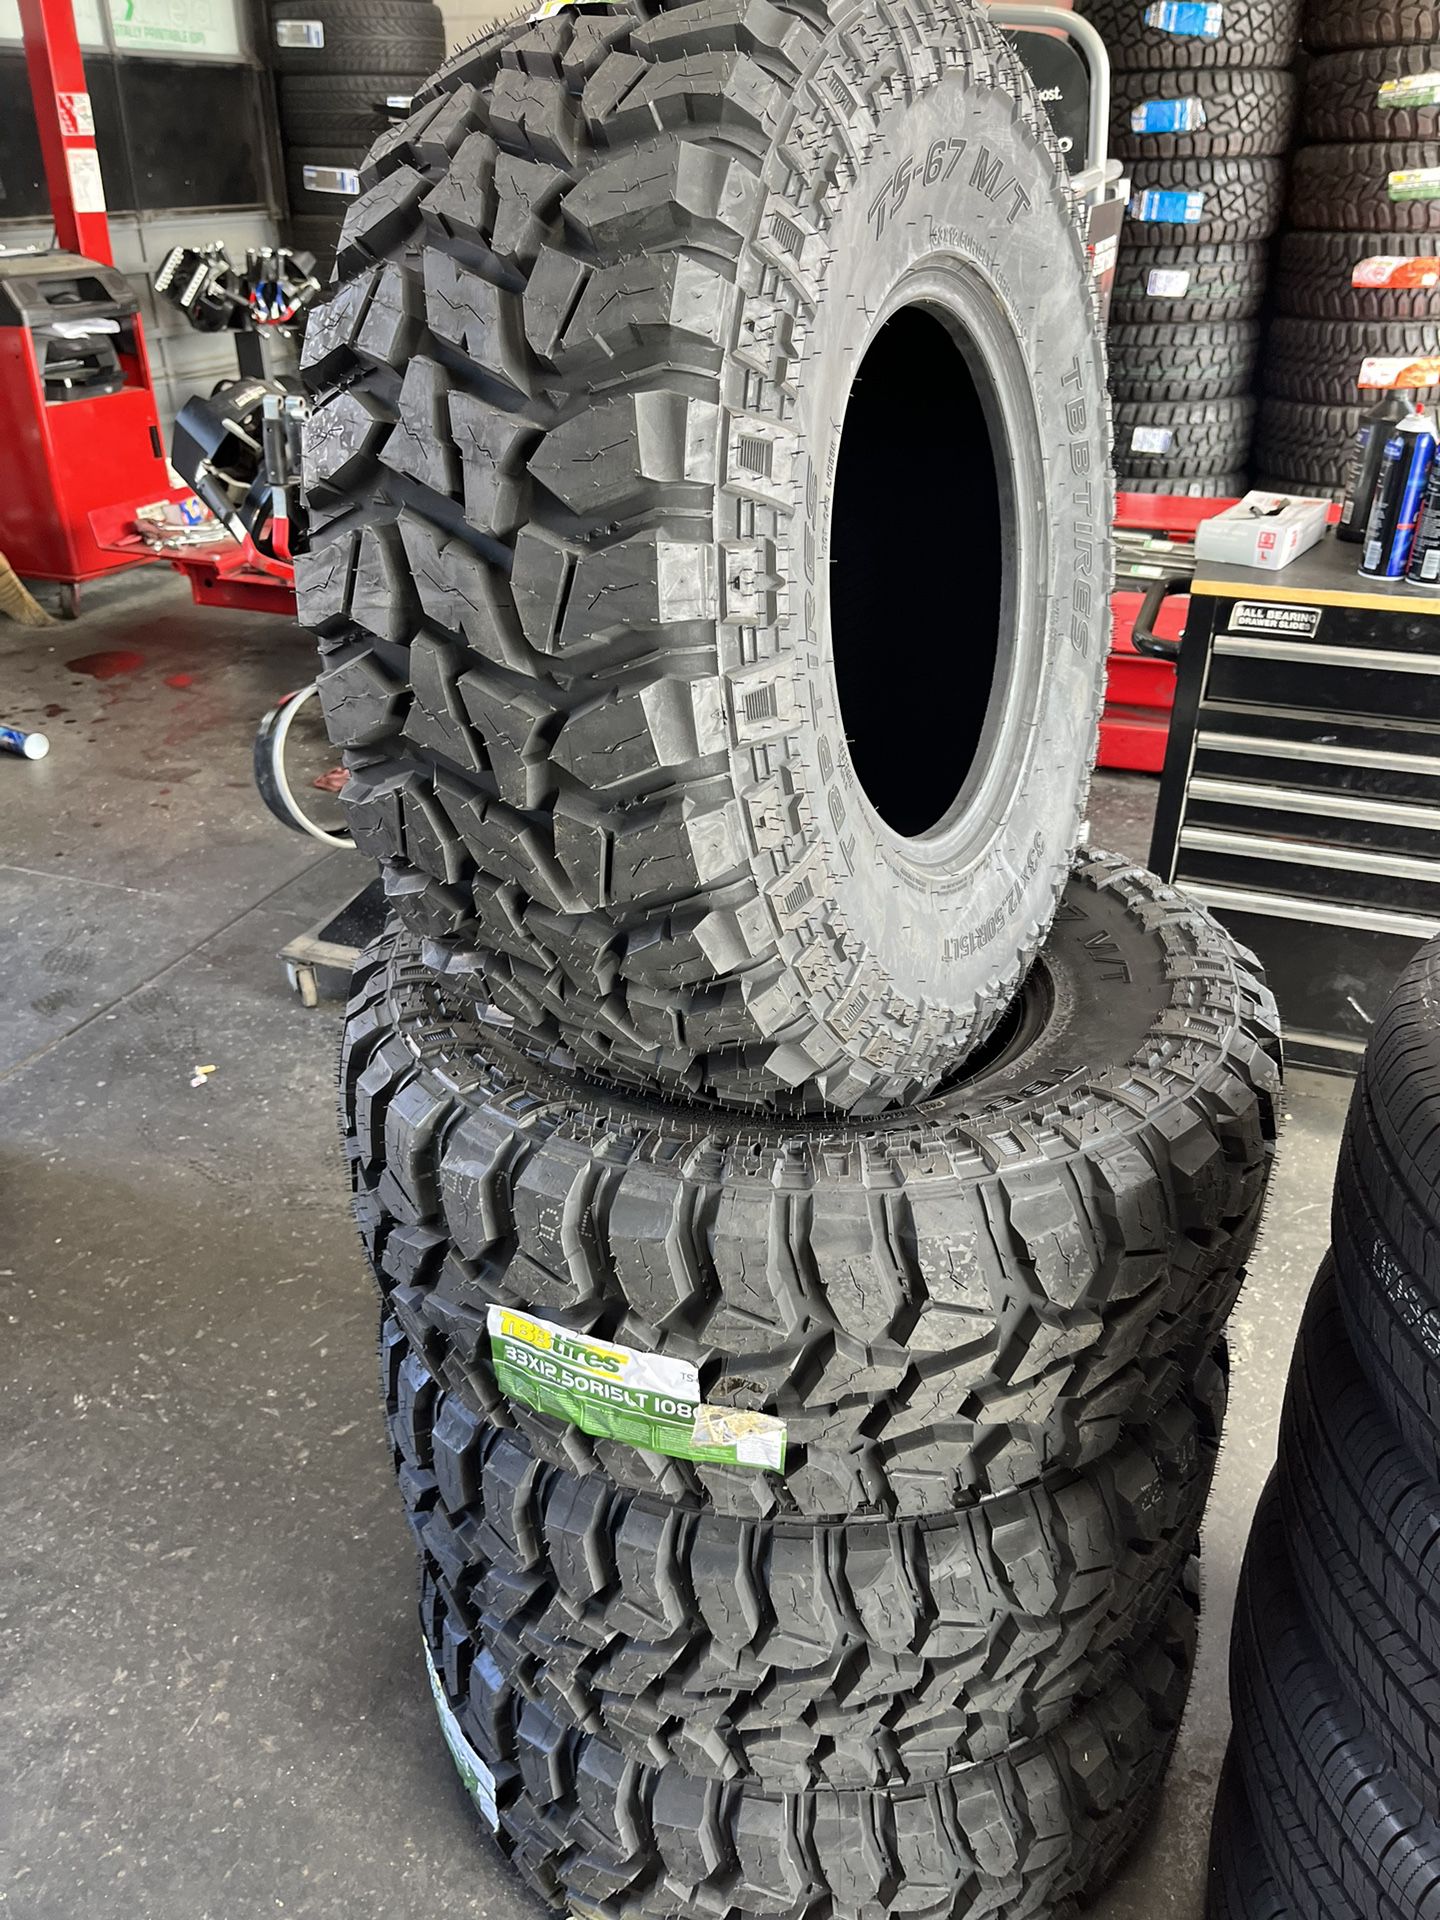 LT285/55R20 SET OF 4 MUD TIRES WITH INSTALLATION AND FREE ALIGNMENT 